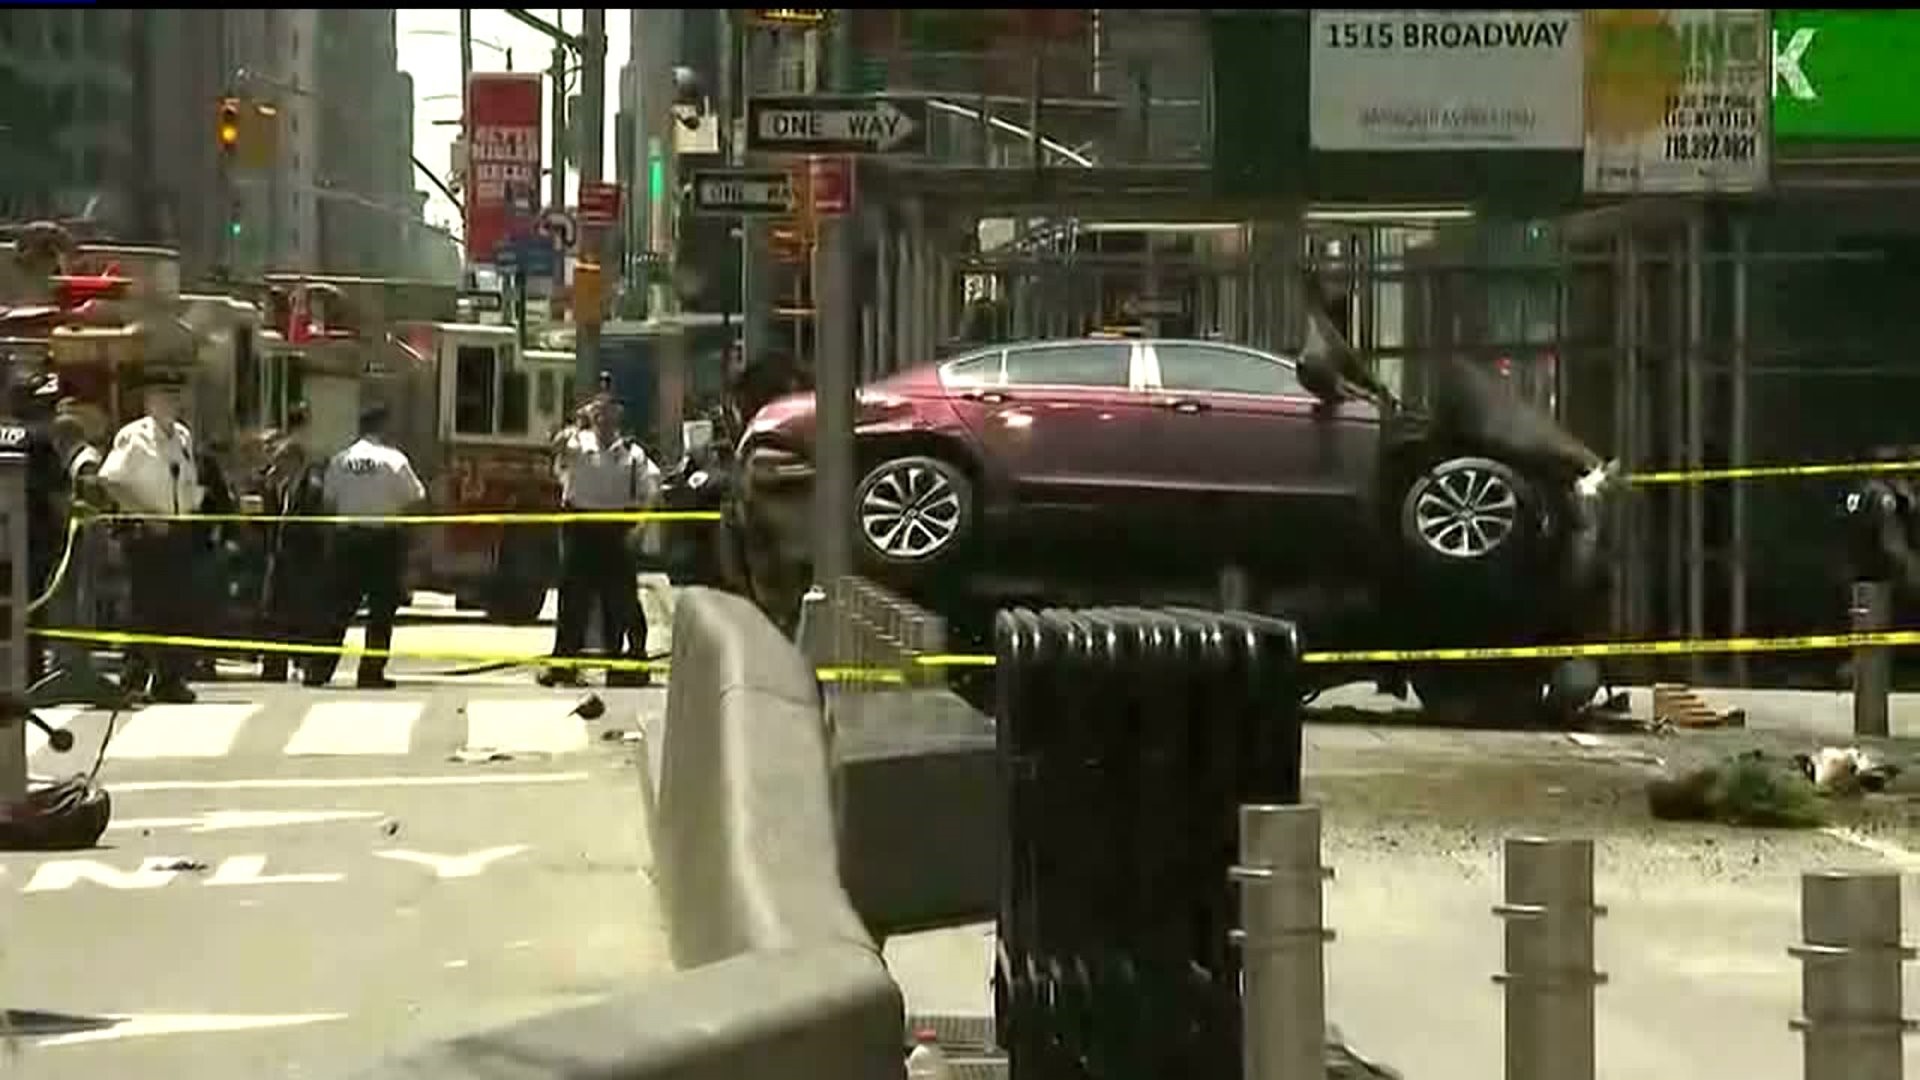 Driver charged with murder in Times Square crash